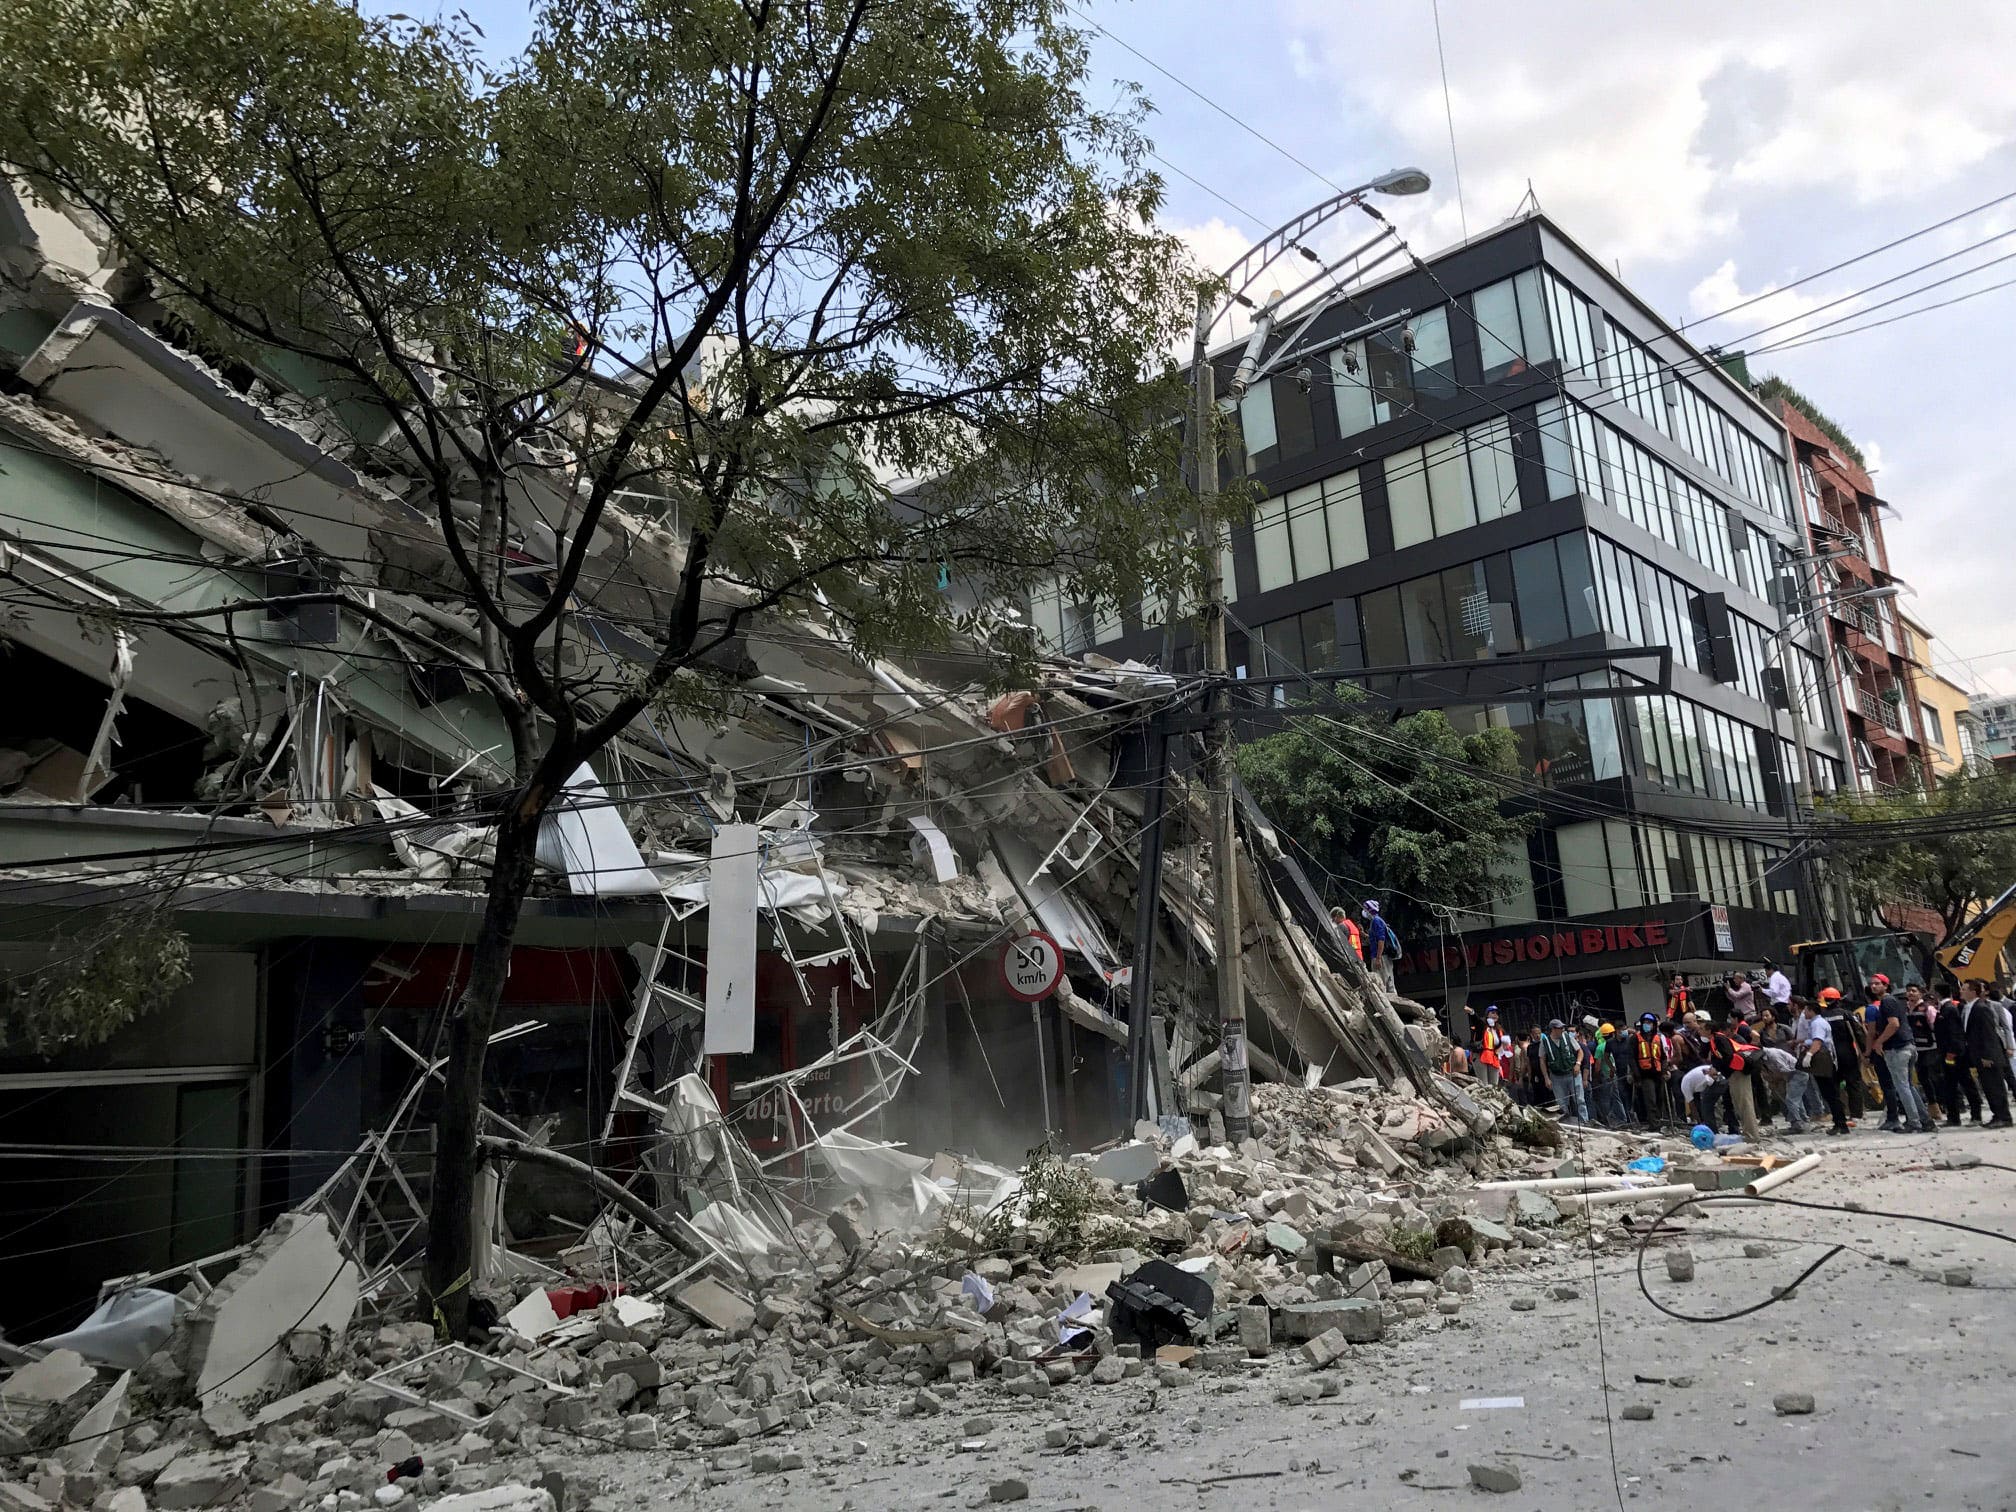 A collapsed building is seen after an earthquake hit in Mexico City, Mexico